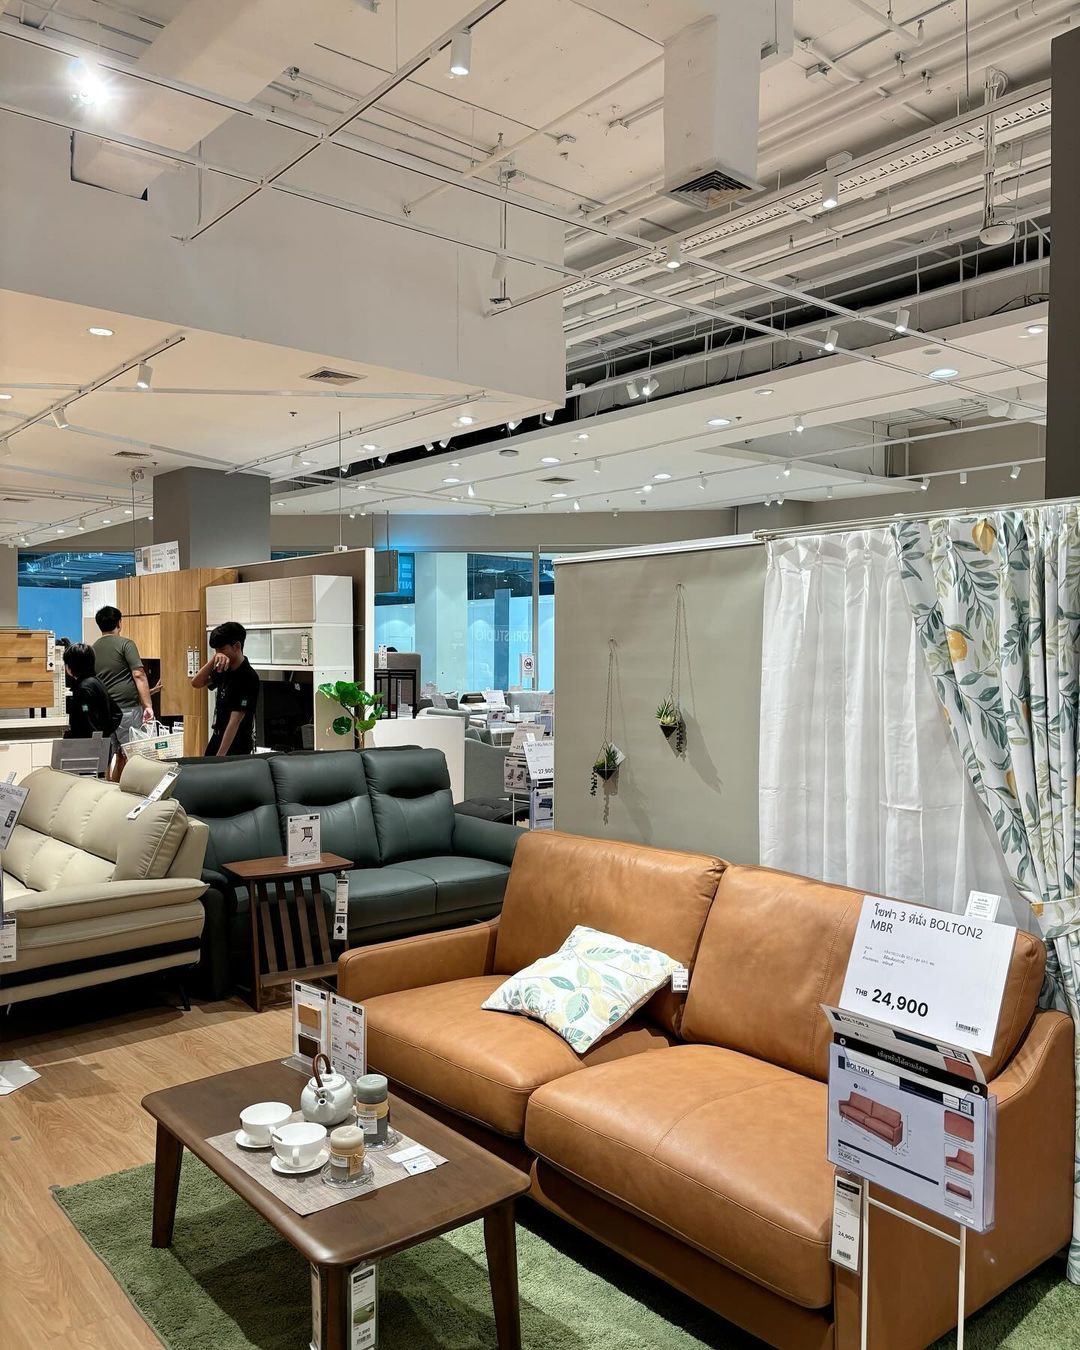 Earth-toned comfy and compact sofas on display at Nitori Thailand